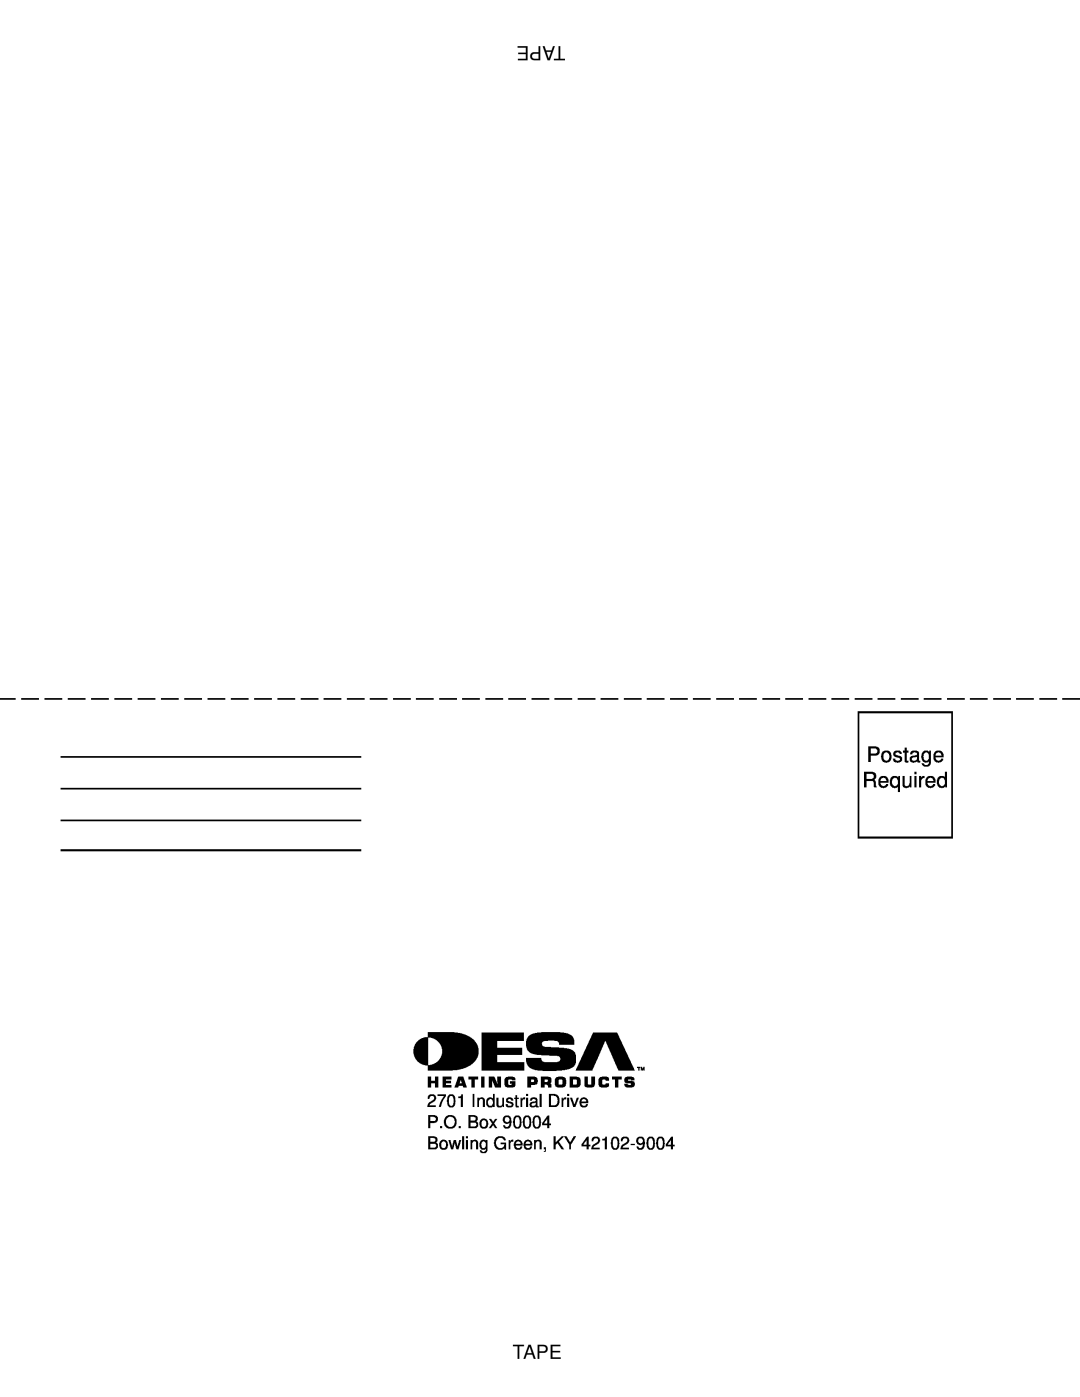 Desa SBLP155AT owner manual Postage Required, Tape, Industrial Drive P.O. Box Bowling Green, KY 